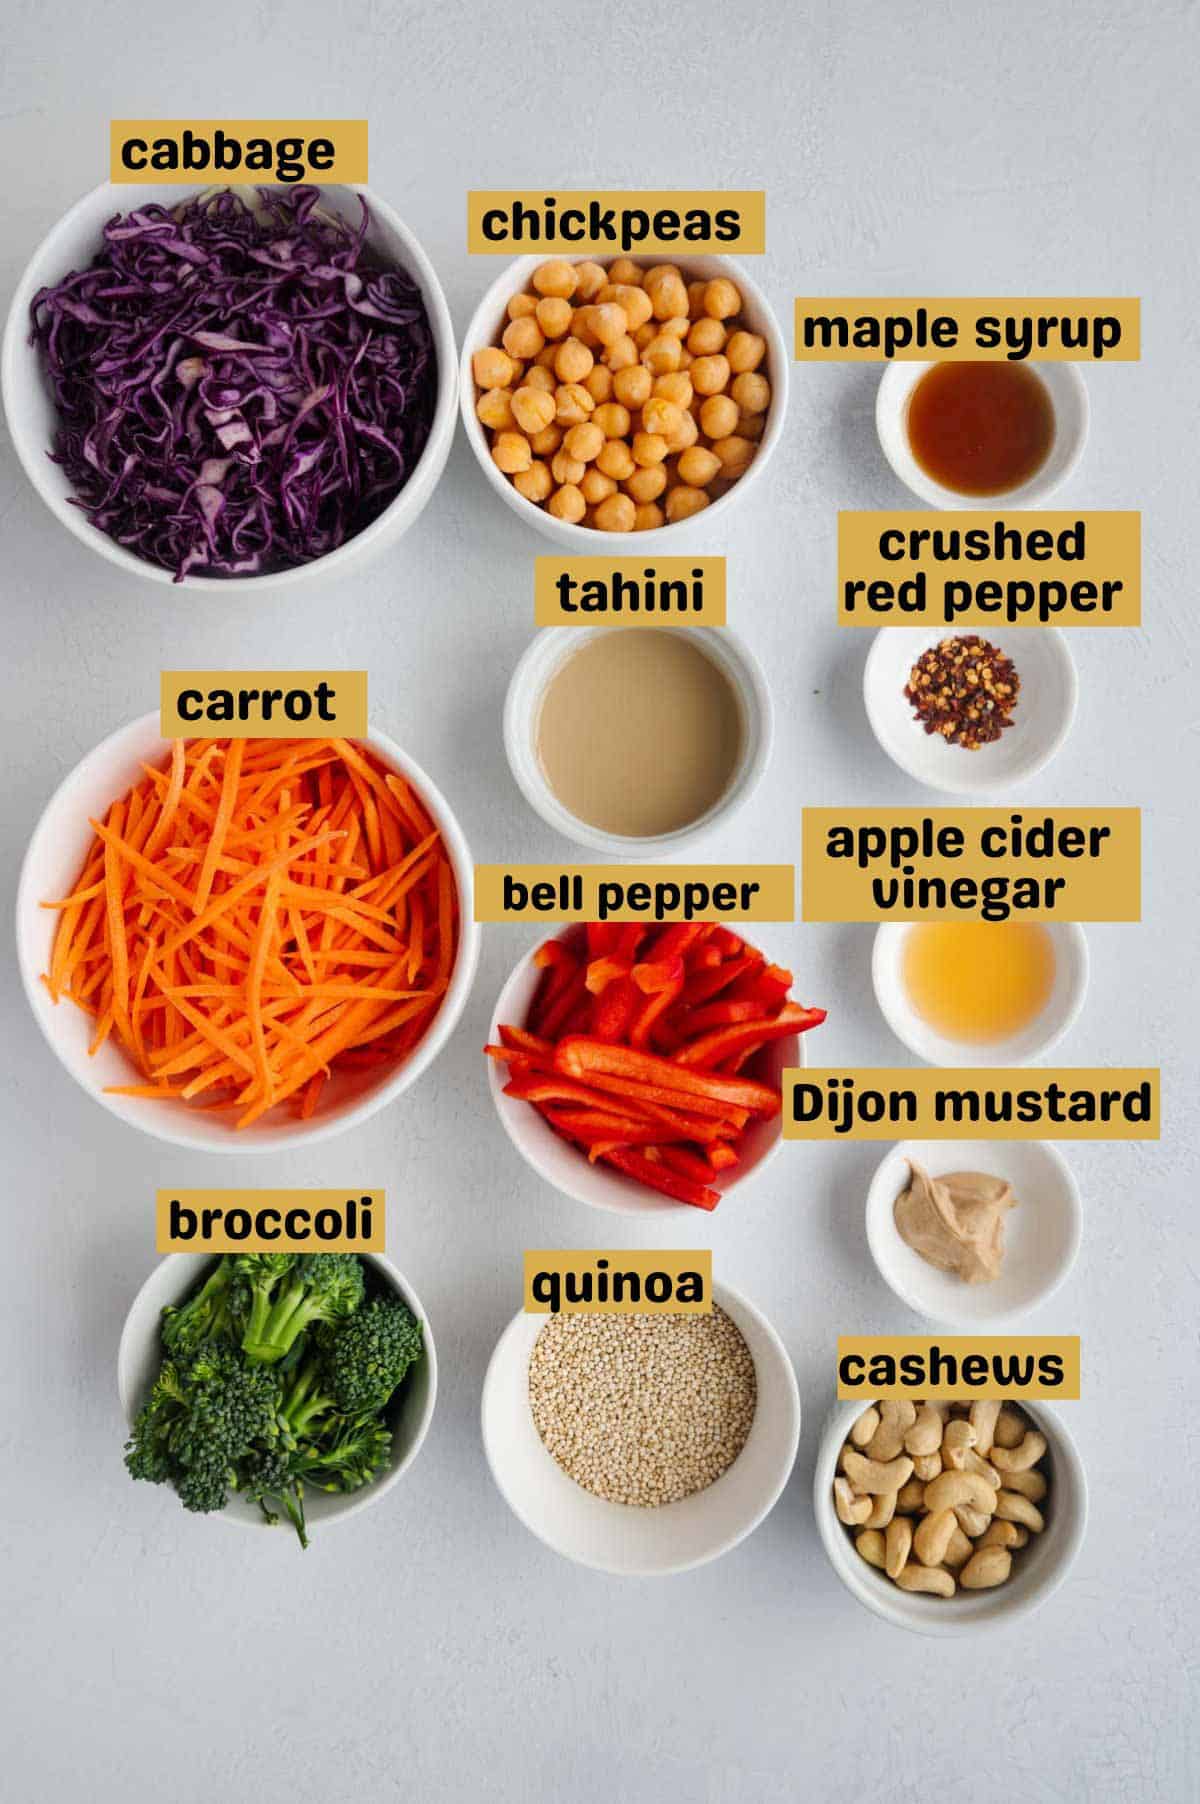 Shredded red cabbage, chickpeas, maple syrup, tahini, sliced carrots, sliced red bell pepper, apple cider vinegar, Dijon, cashews, quinoa, and broccoli in white bowls.